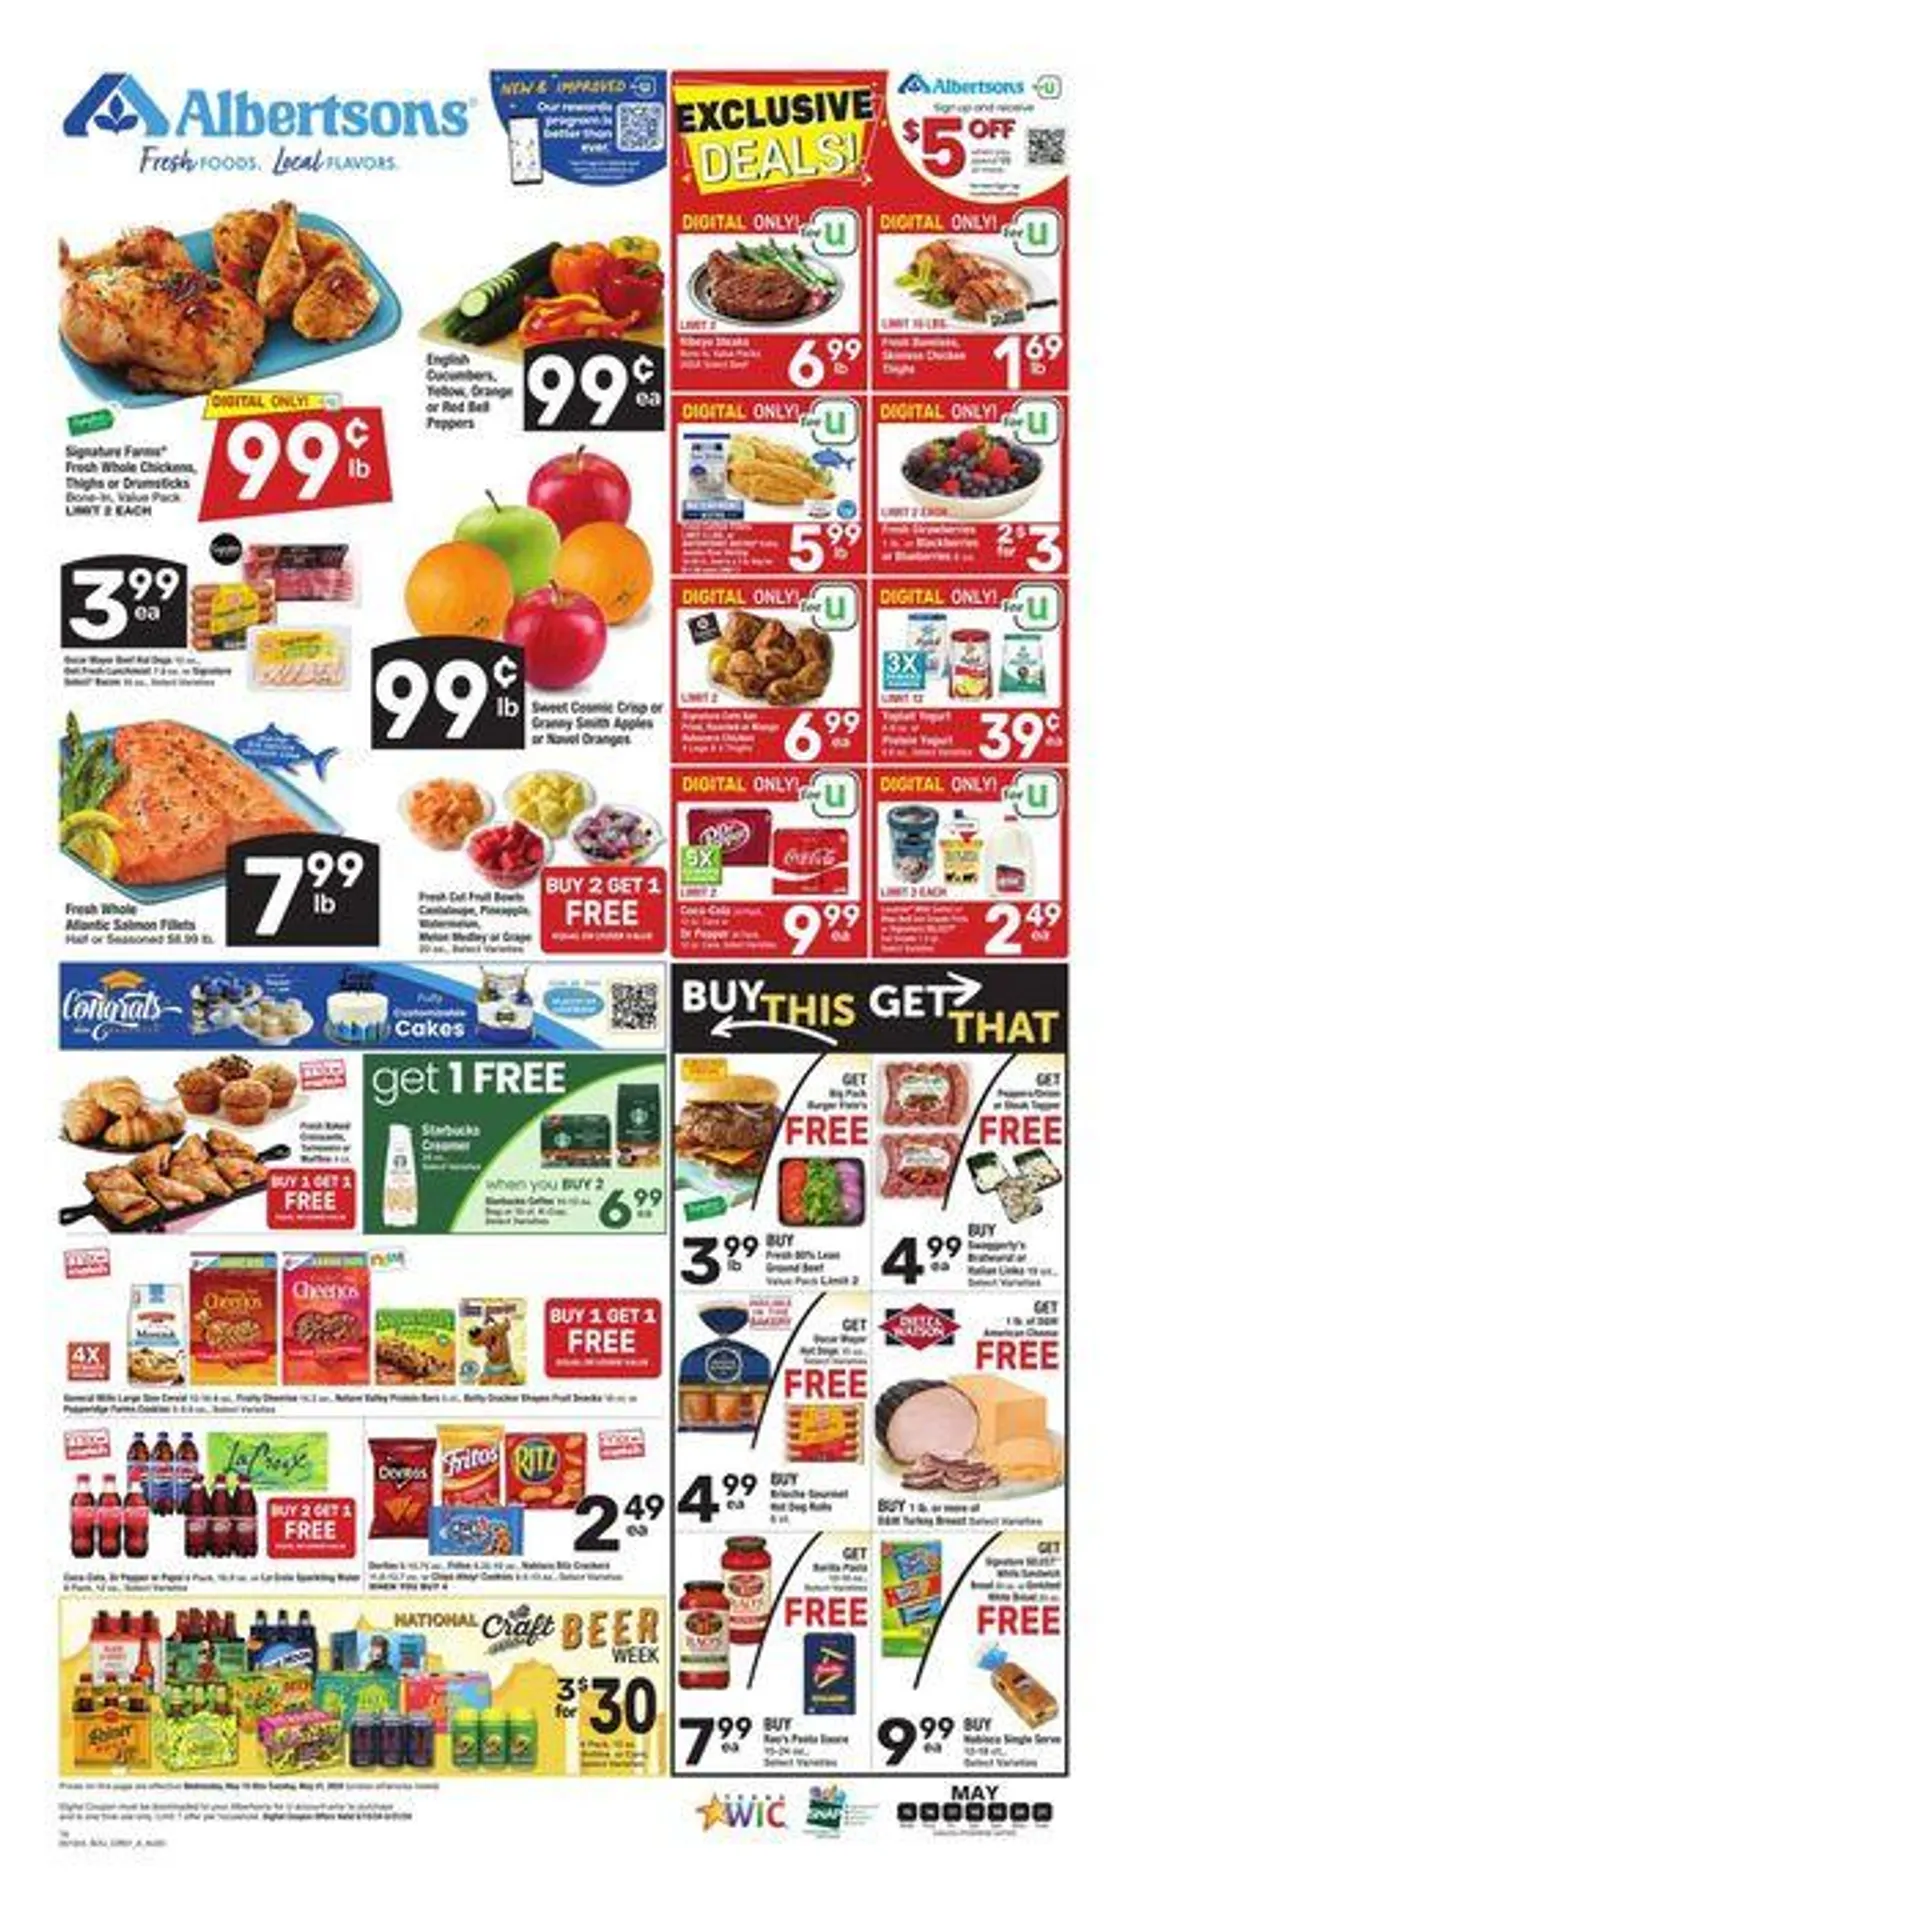 Weekly Ad - Albertsons - Southern - 1